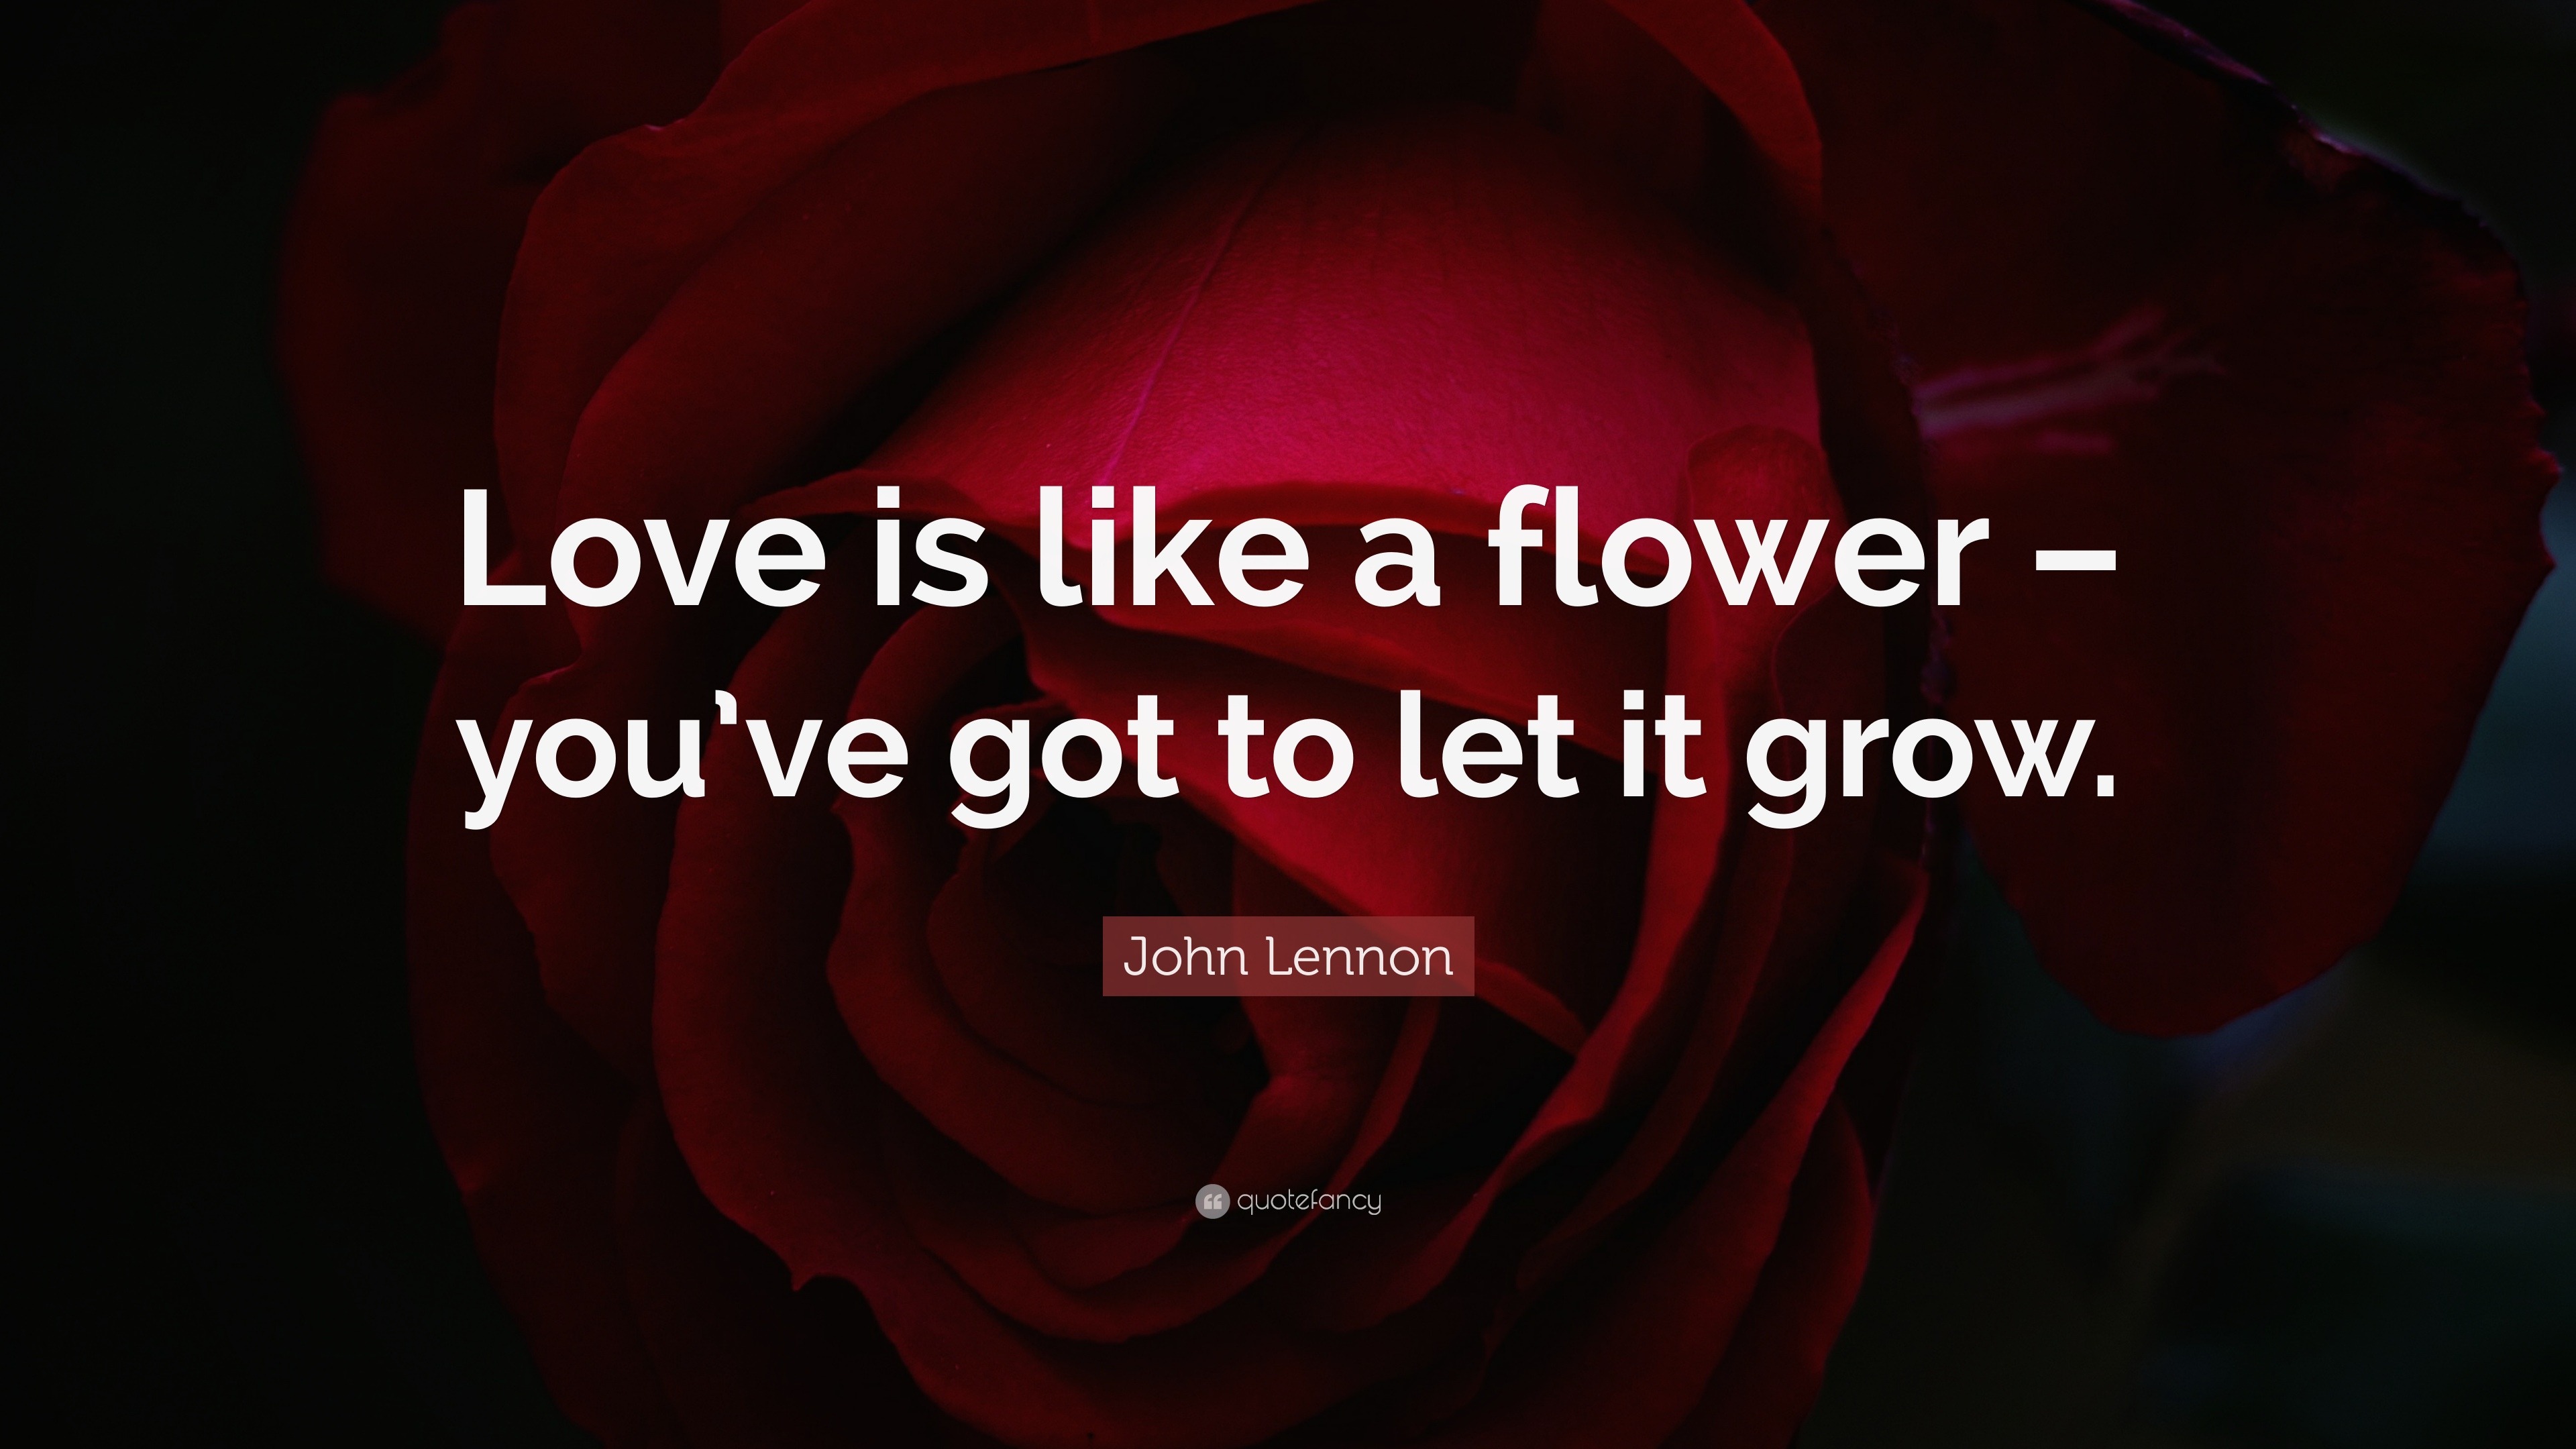 John Lennon Quote Love Is Like A Flower You Ve Got To Let It Grow 19 Wallpapers Quotefancy